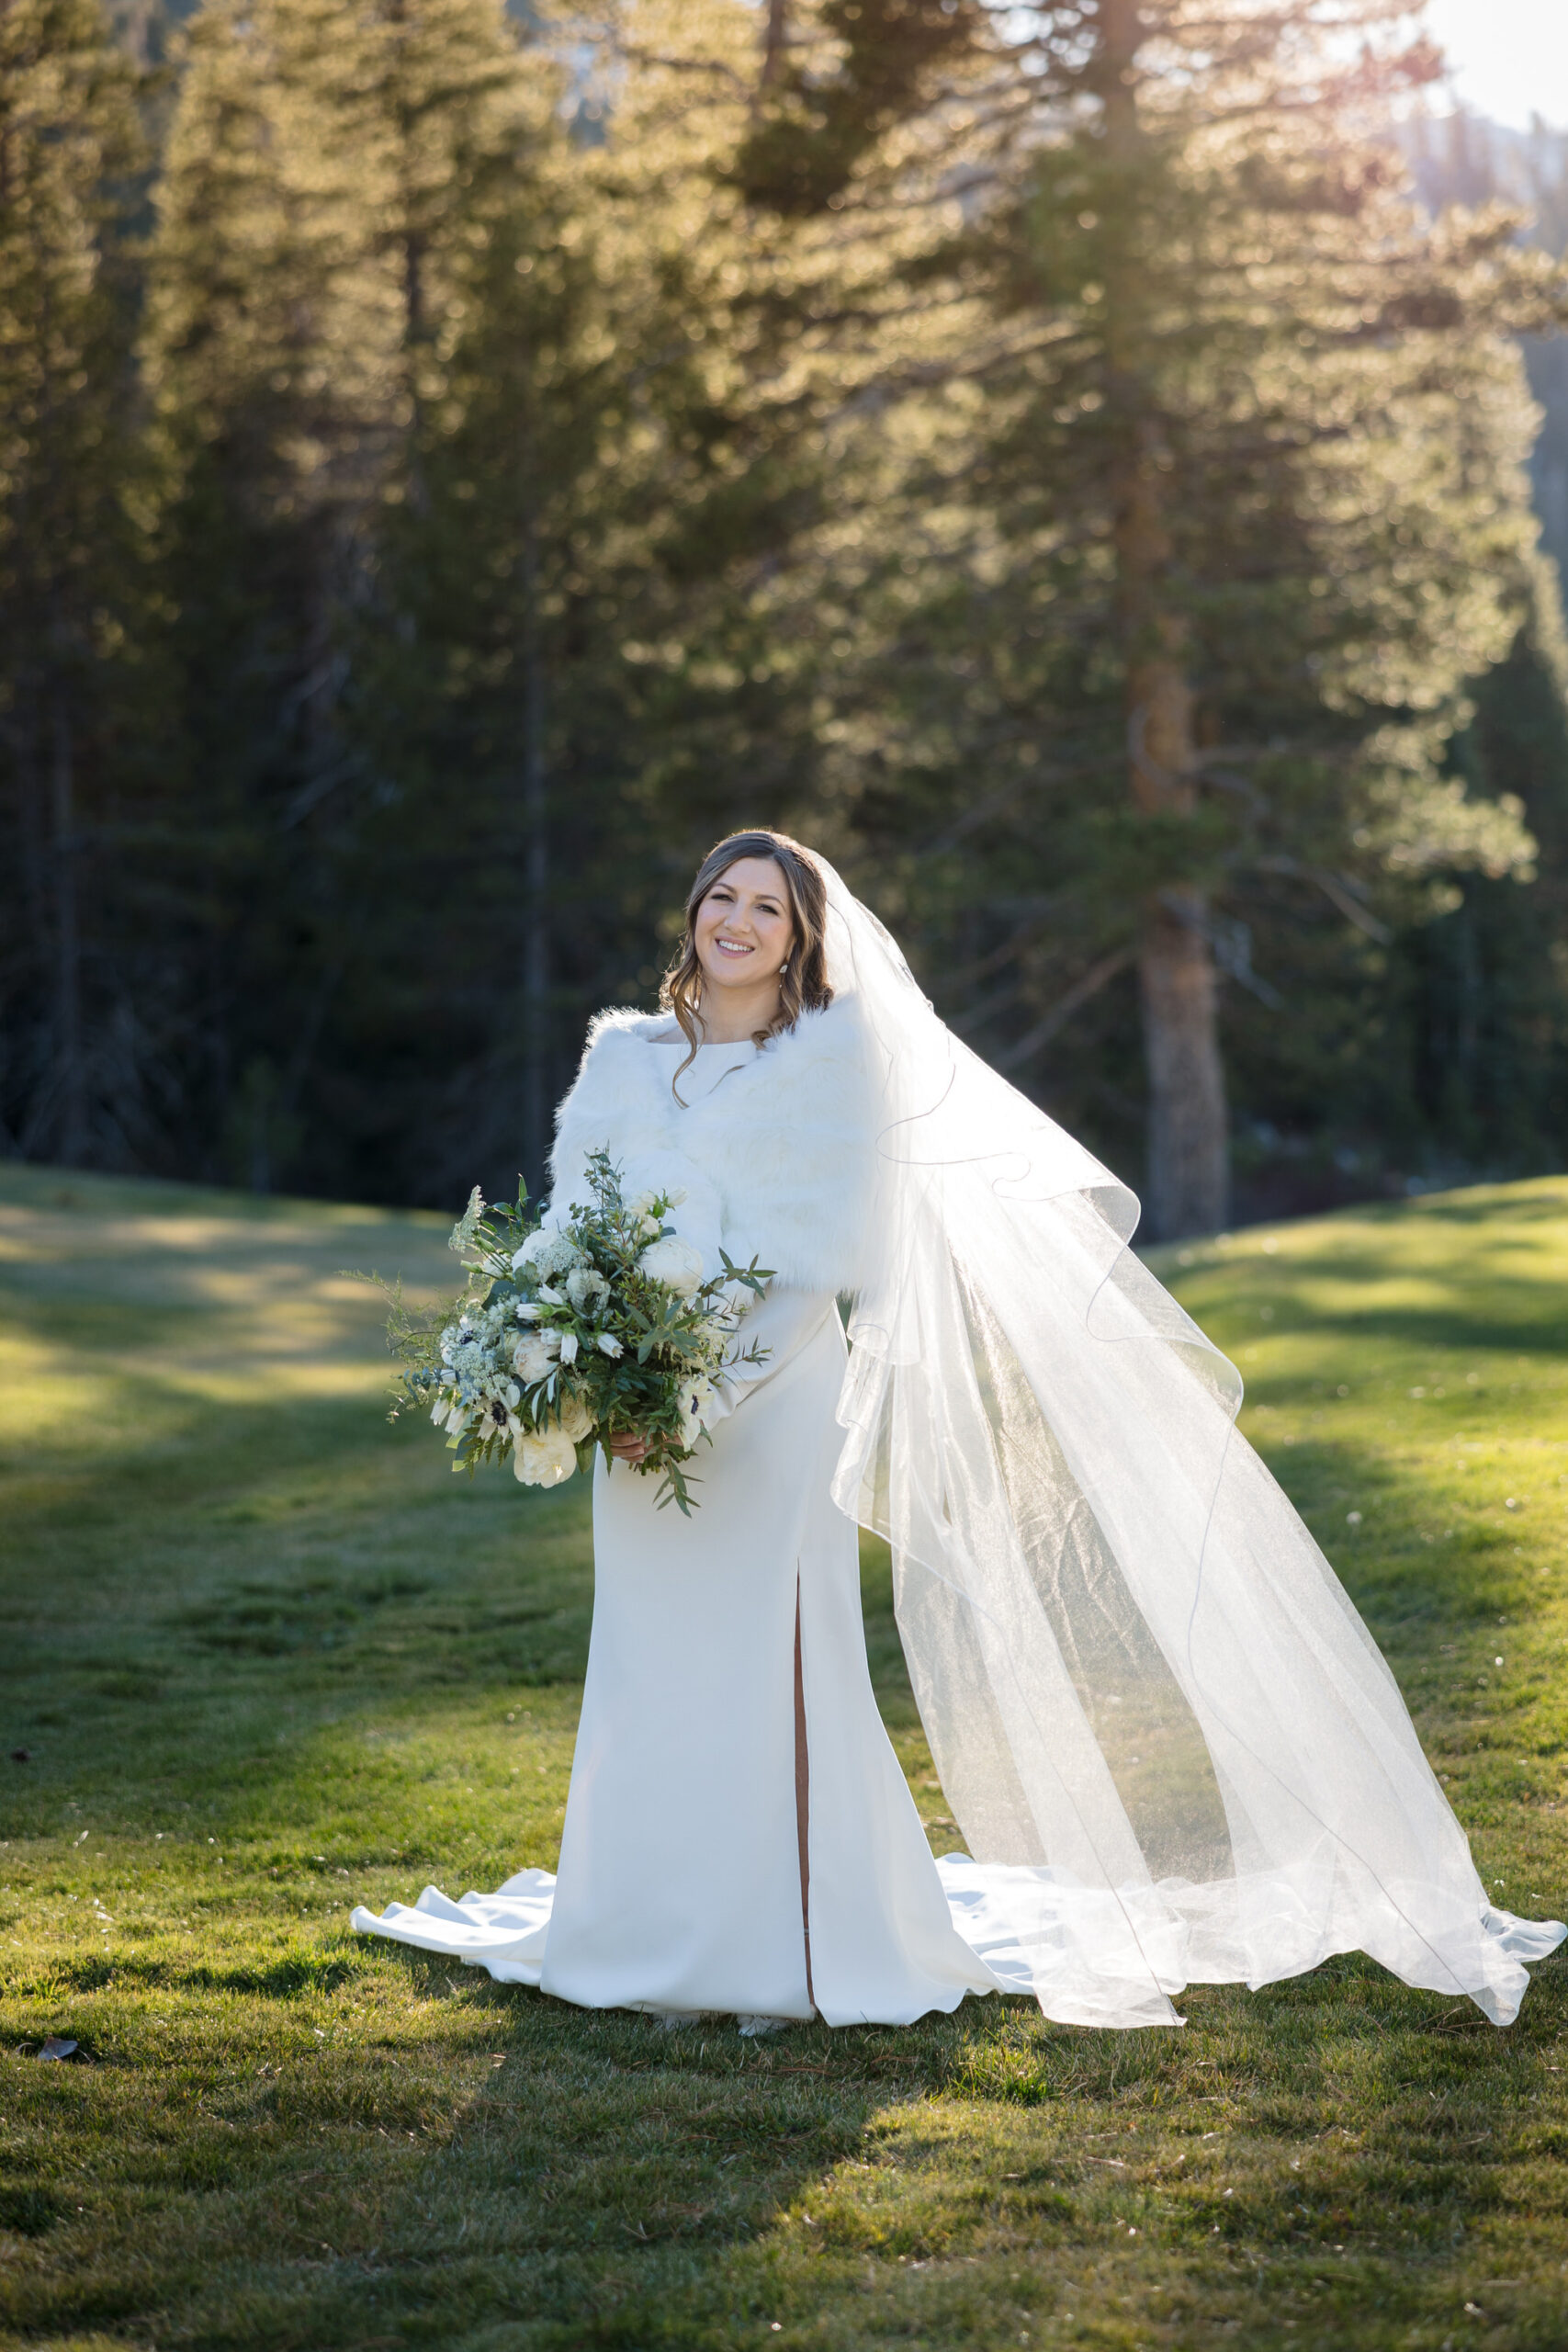 Sunset portrait of a bride wearing a white fur wrap for a winter wedding.